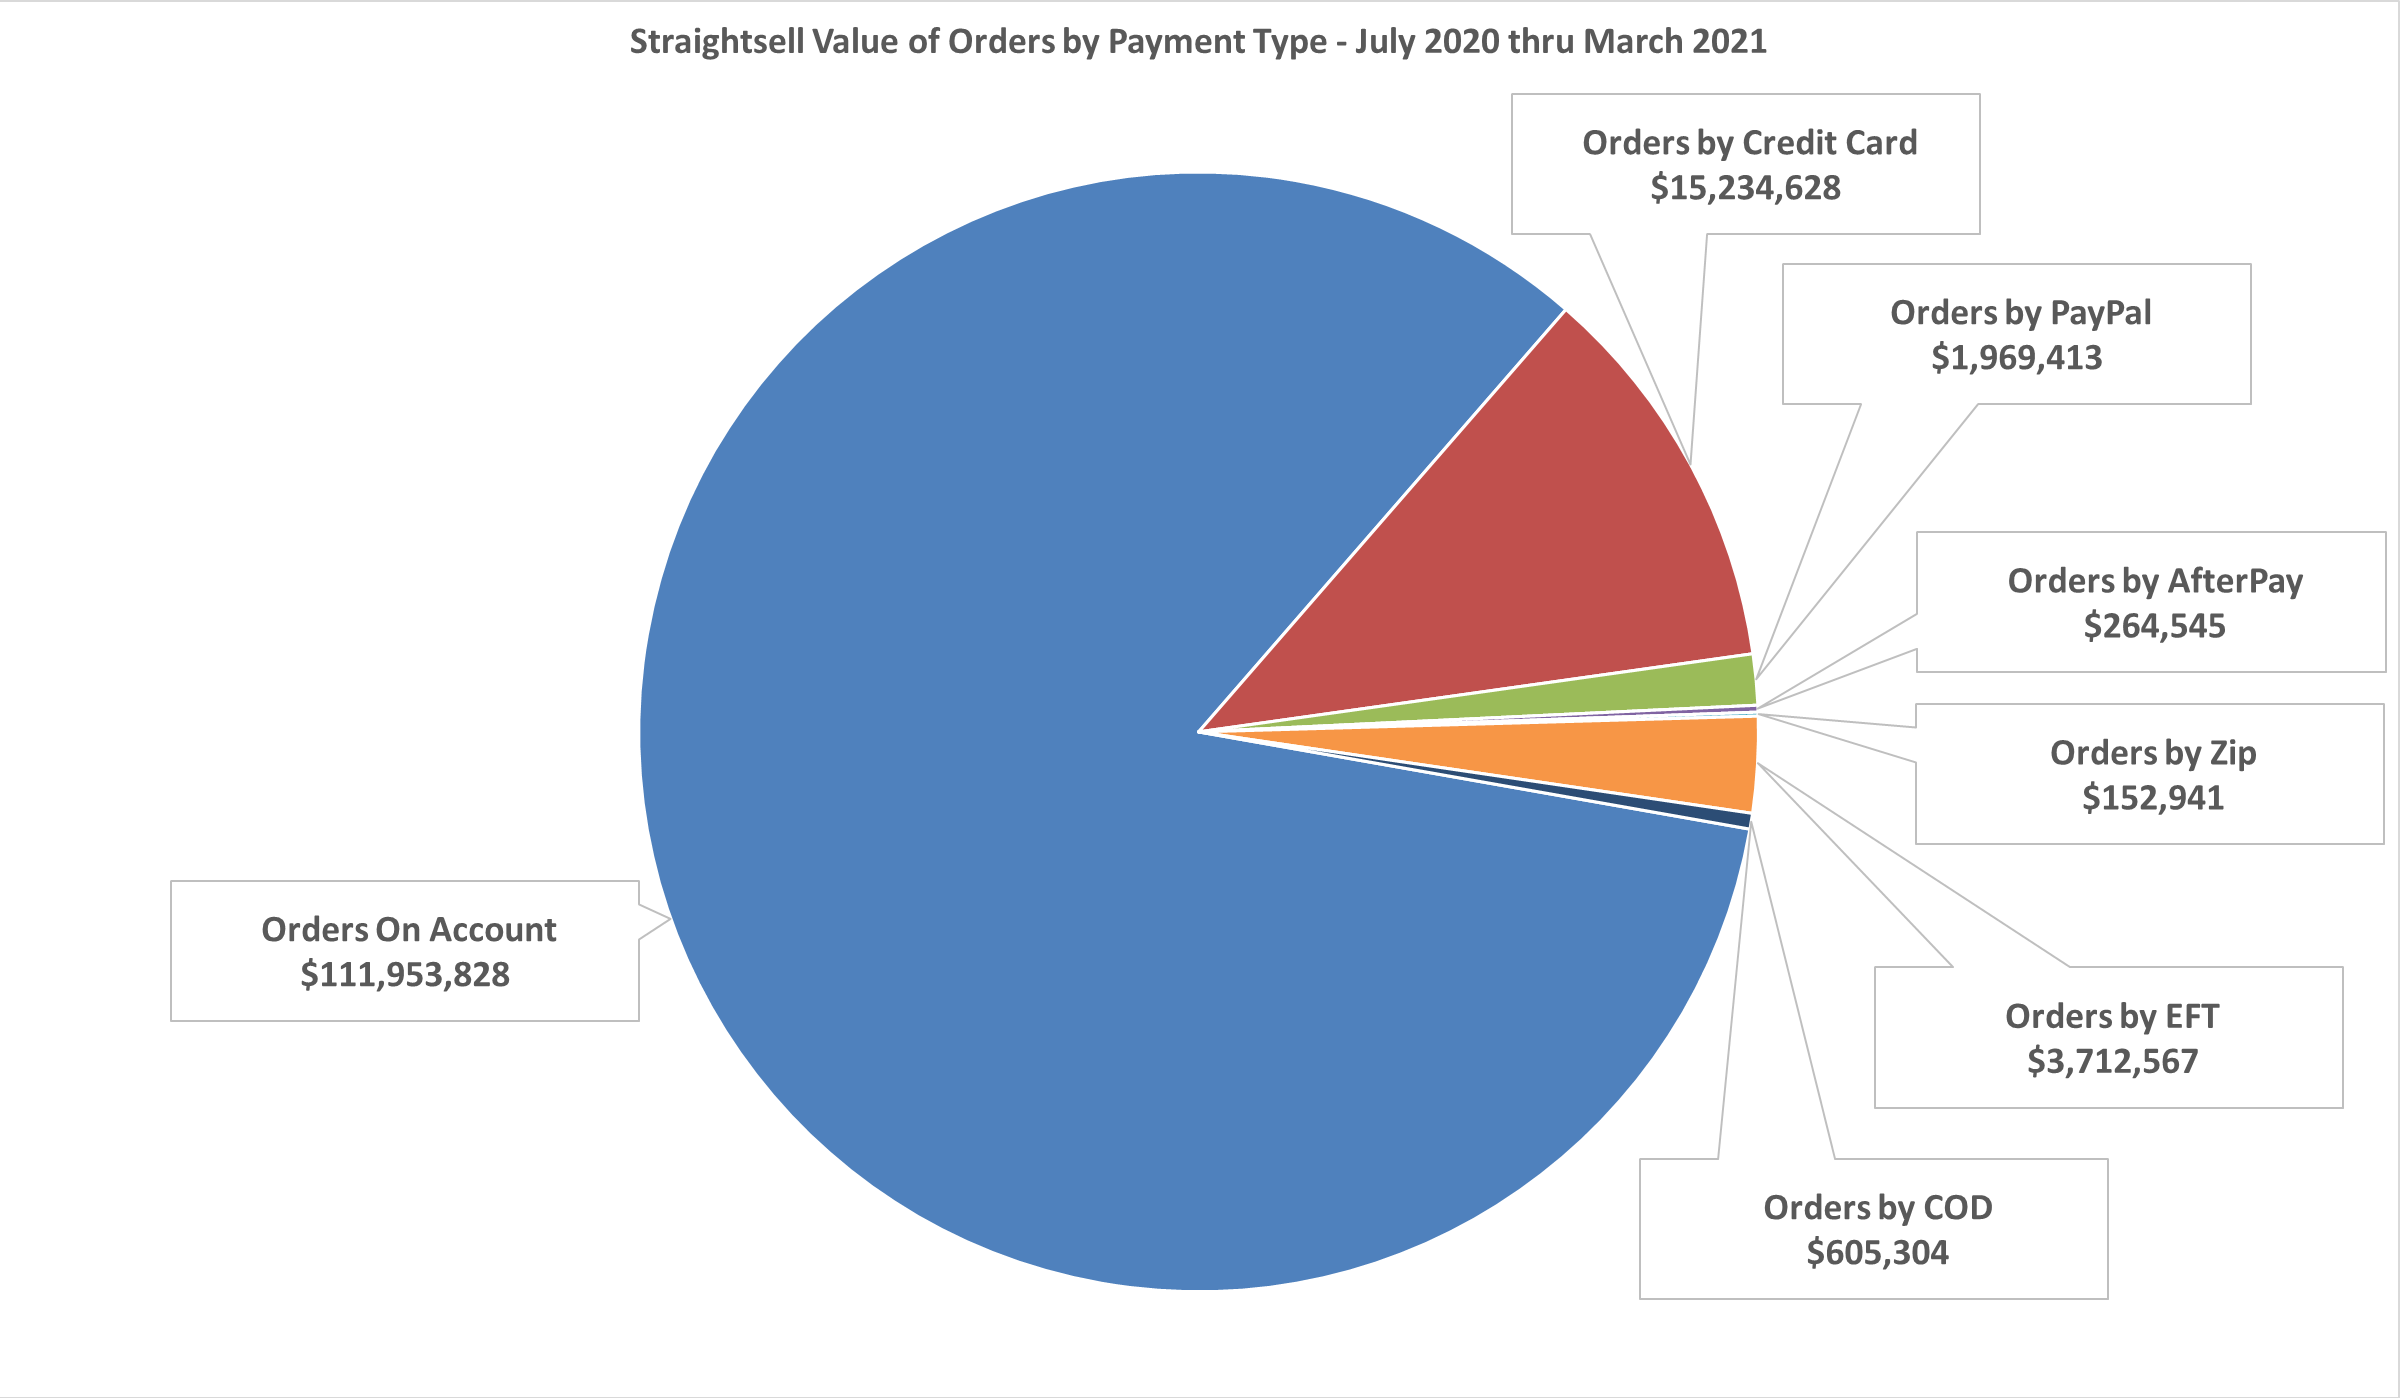 Straightsell Value of Orders by Payment Type - July 2020 thru March 2021